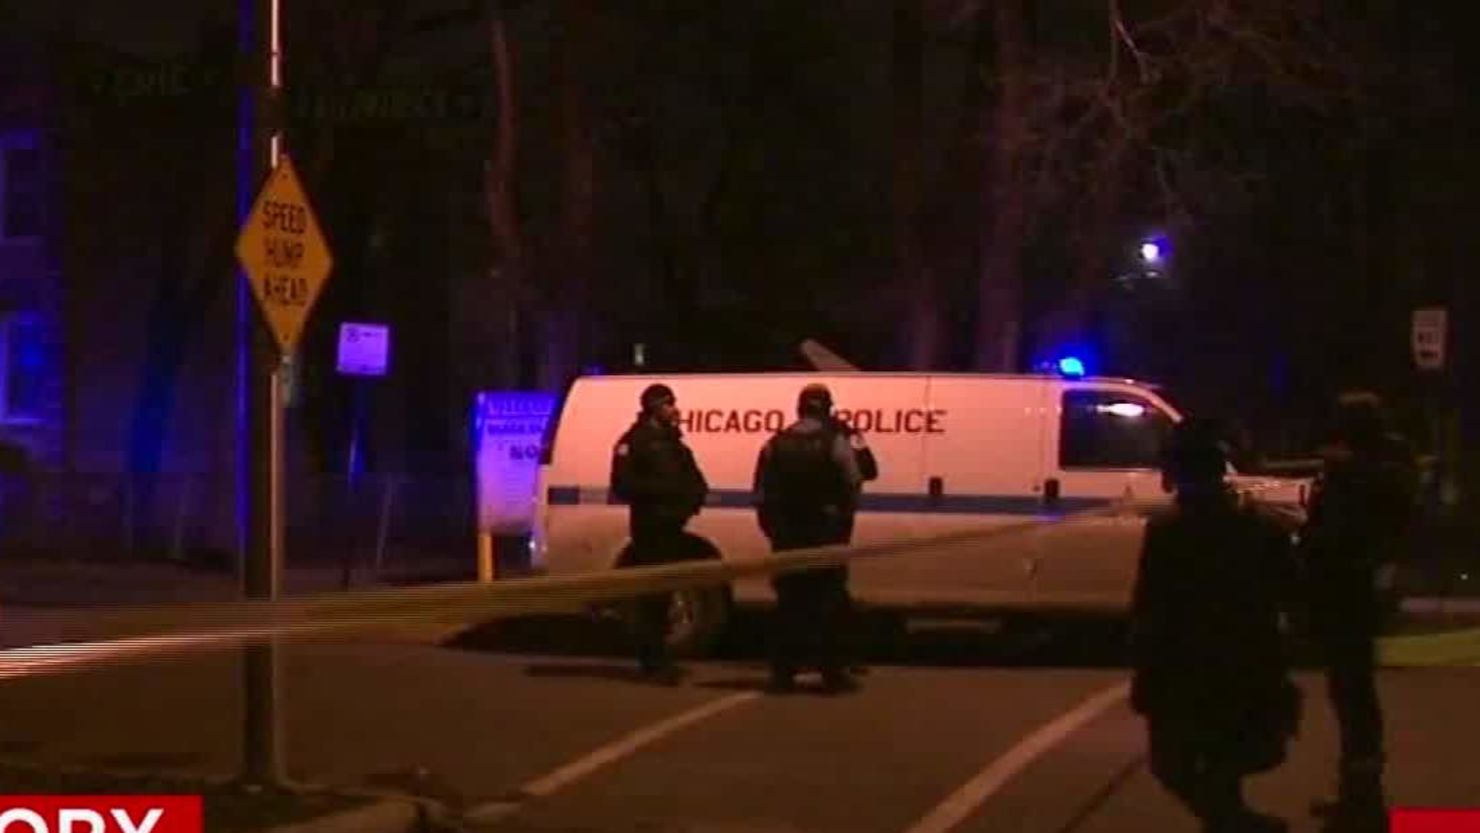 Chicago marked its deadliest year in nearly two decades in 2016, with a reported 762 homicides.